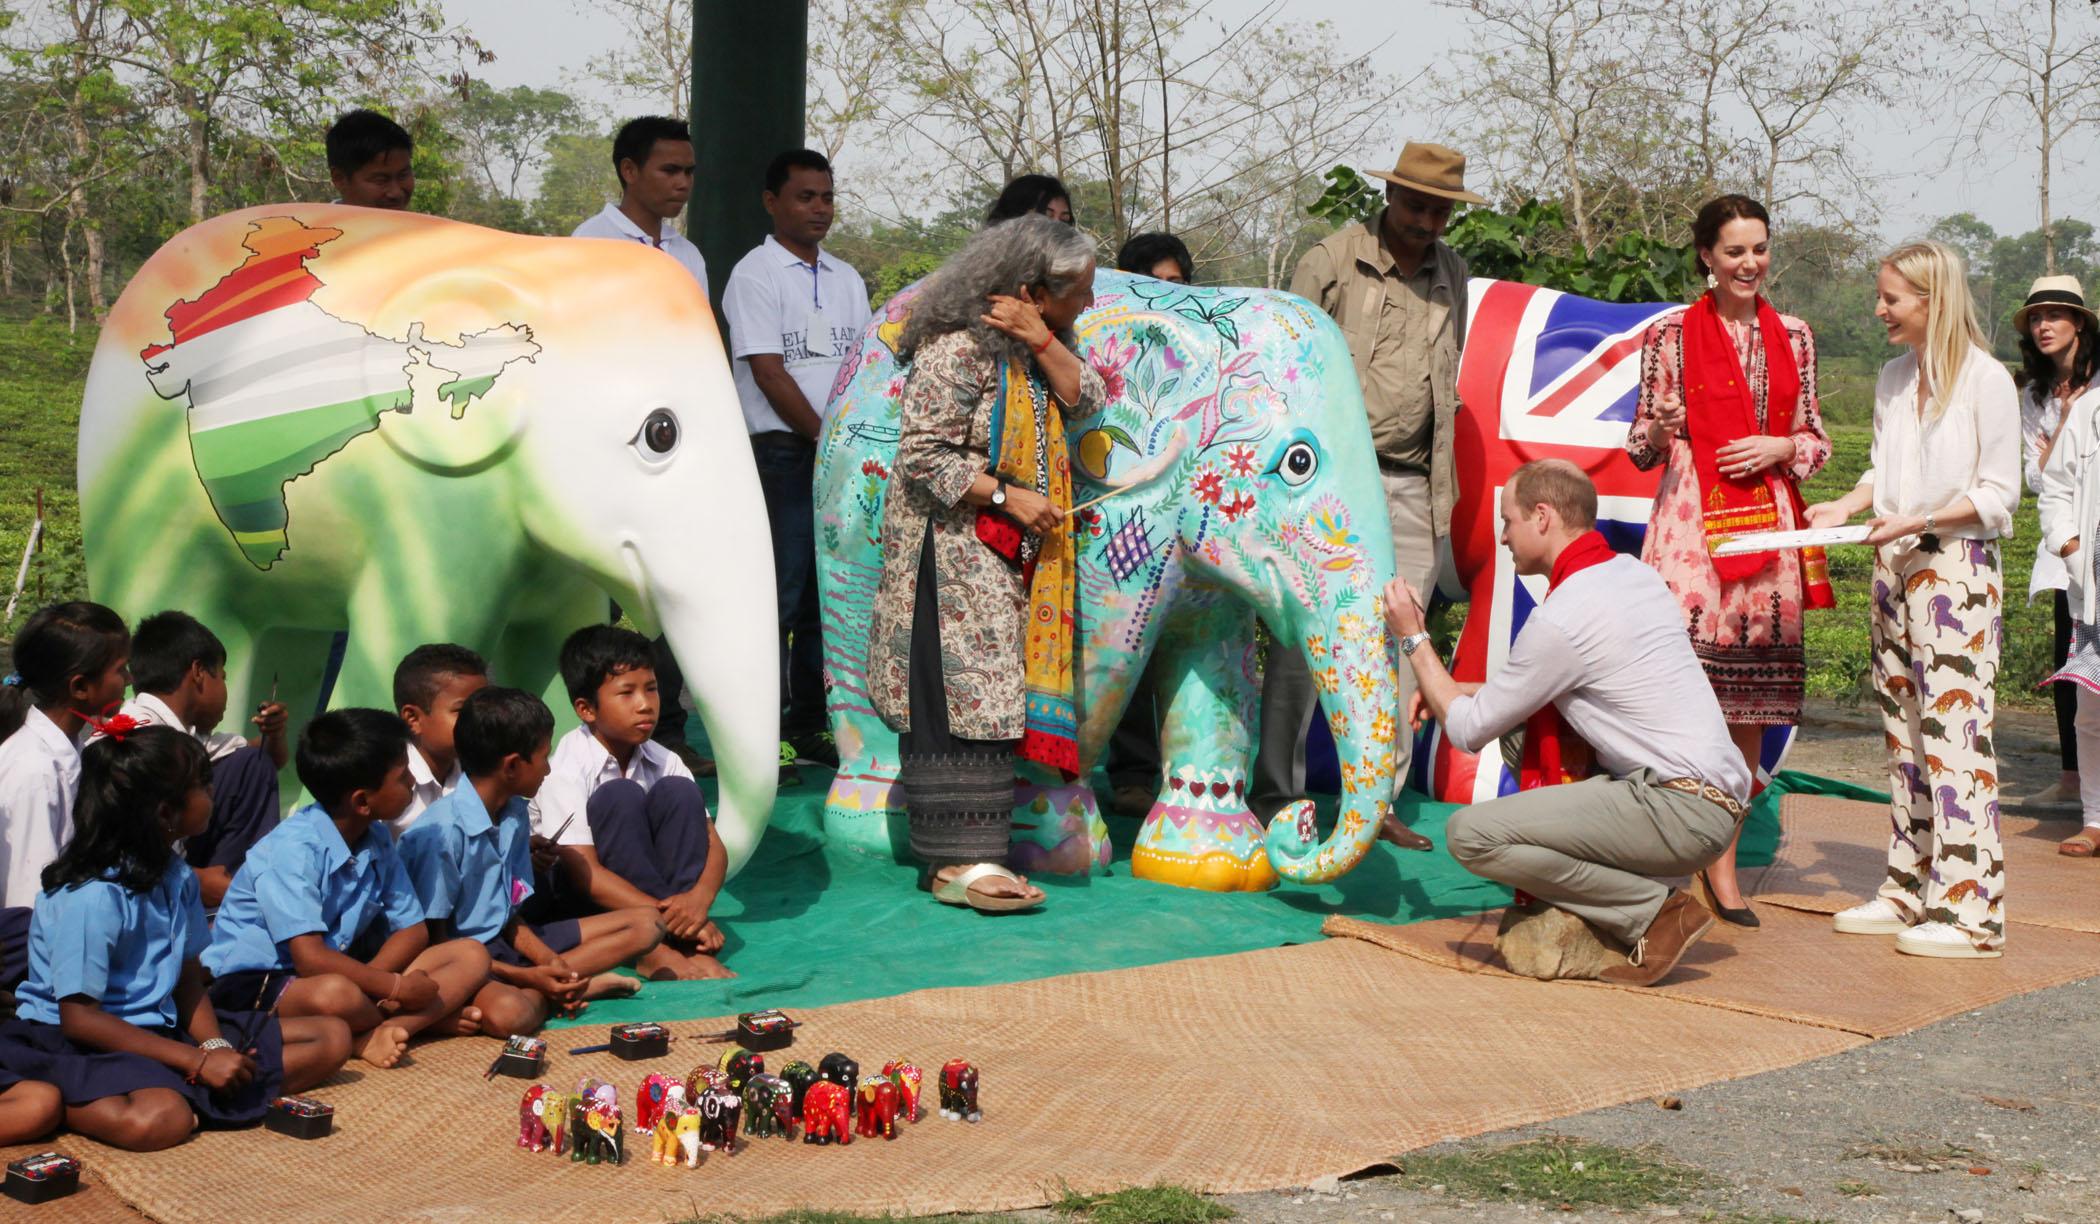 The Duke and Duchess of Cambridge visit IFAW-WTI’s Centre for Wildlife Rehabilitation and Conservation, interact with orphaned elephants and rhinos, and paint an elephant with schoolchildren.